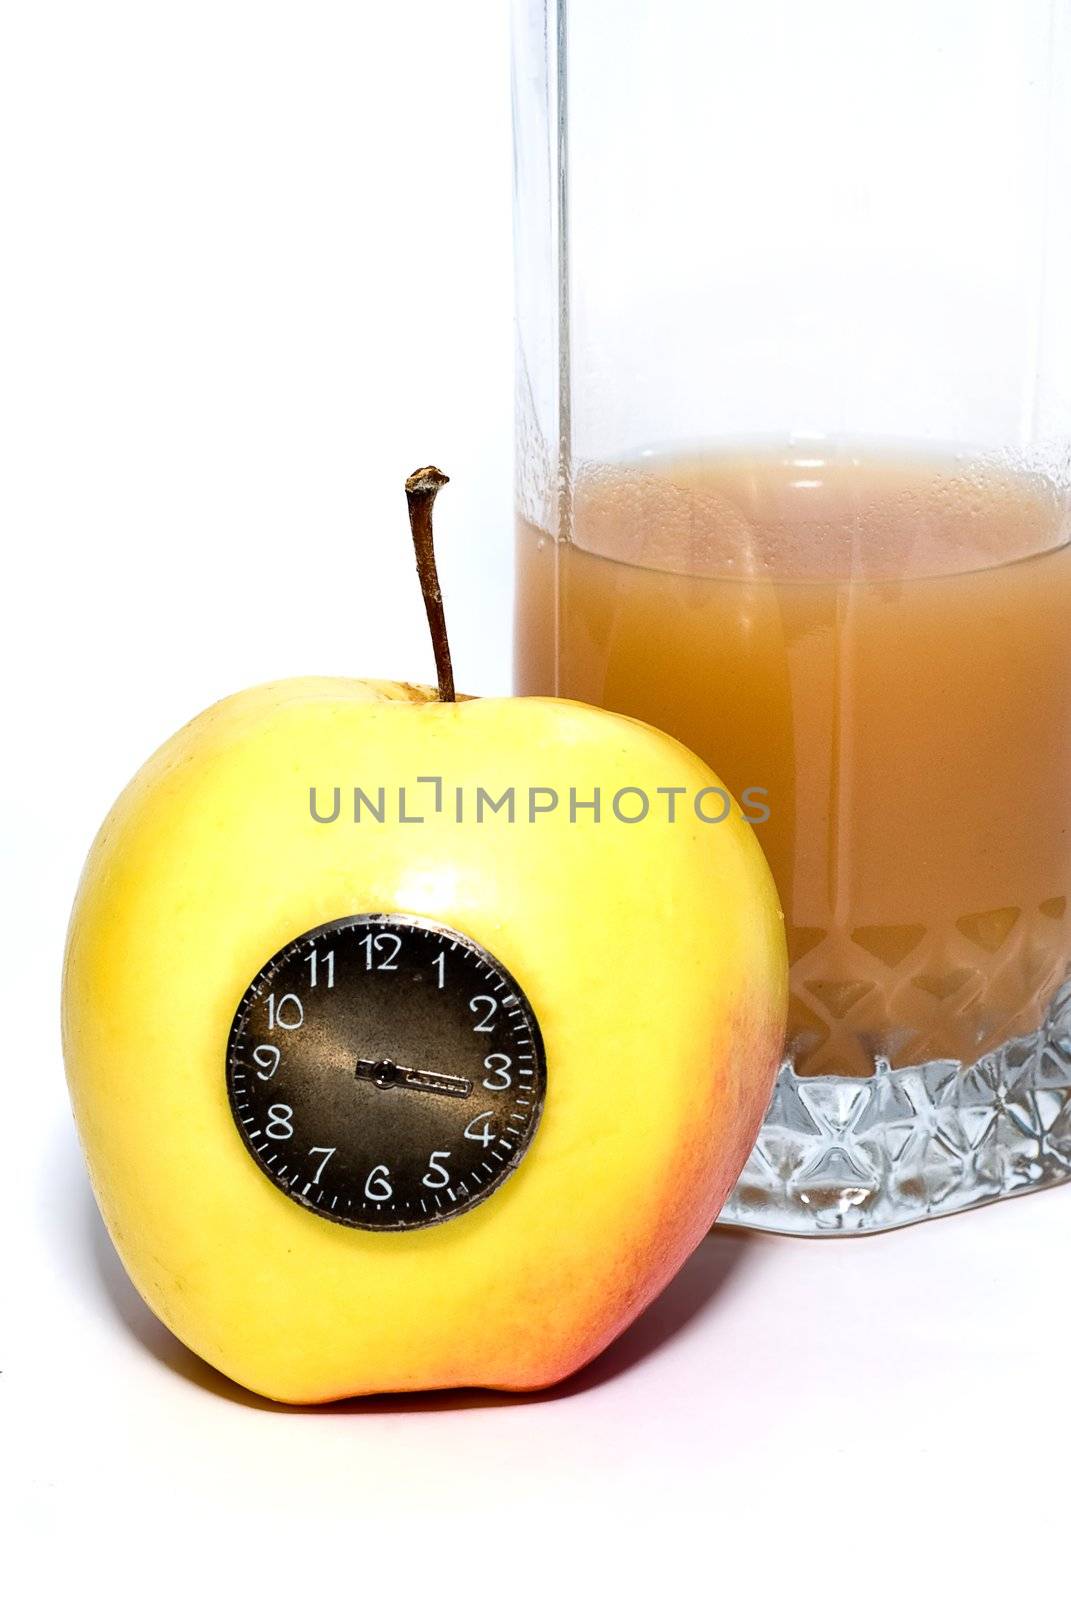 glass of juice behind the yellow apple with the clock